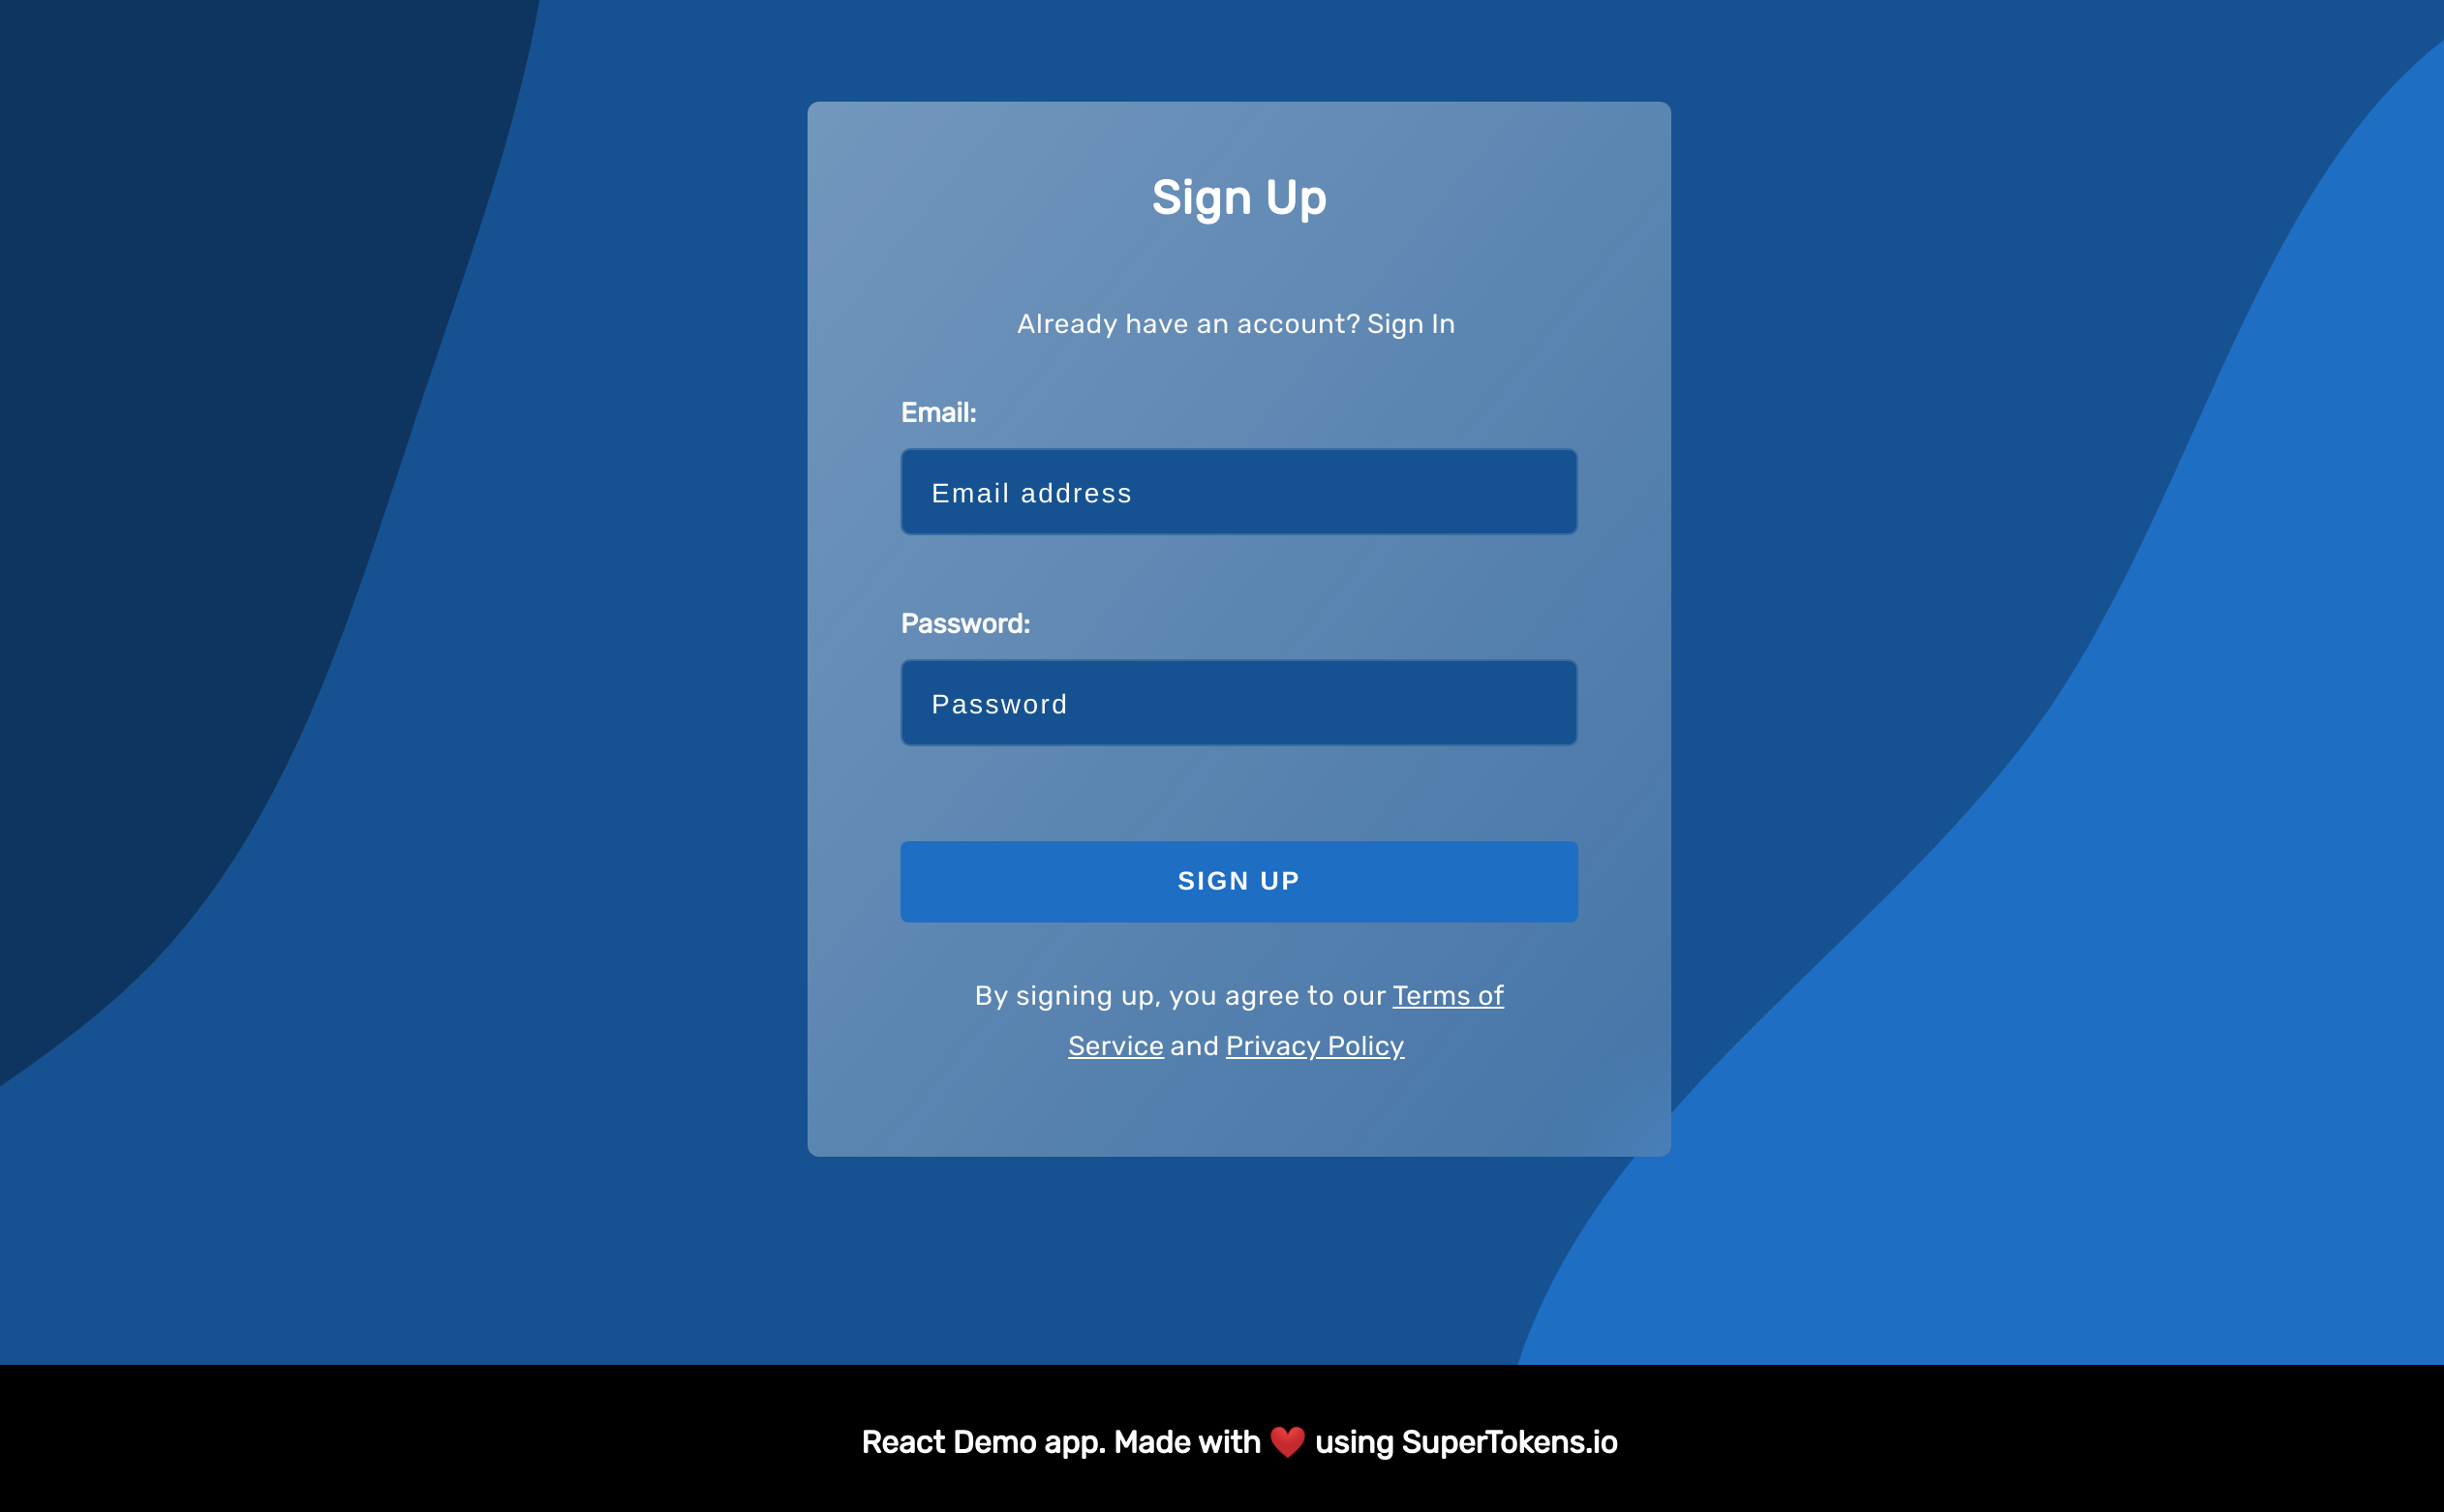 Prebuilt sign up form in Hydrogen theme